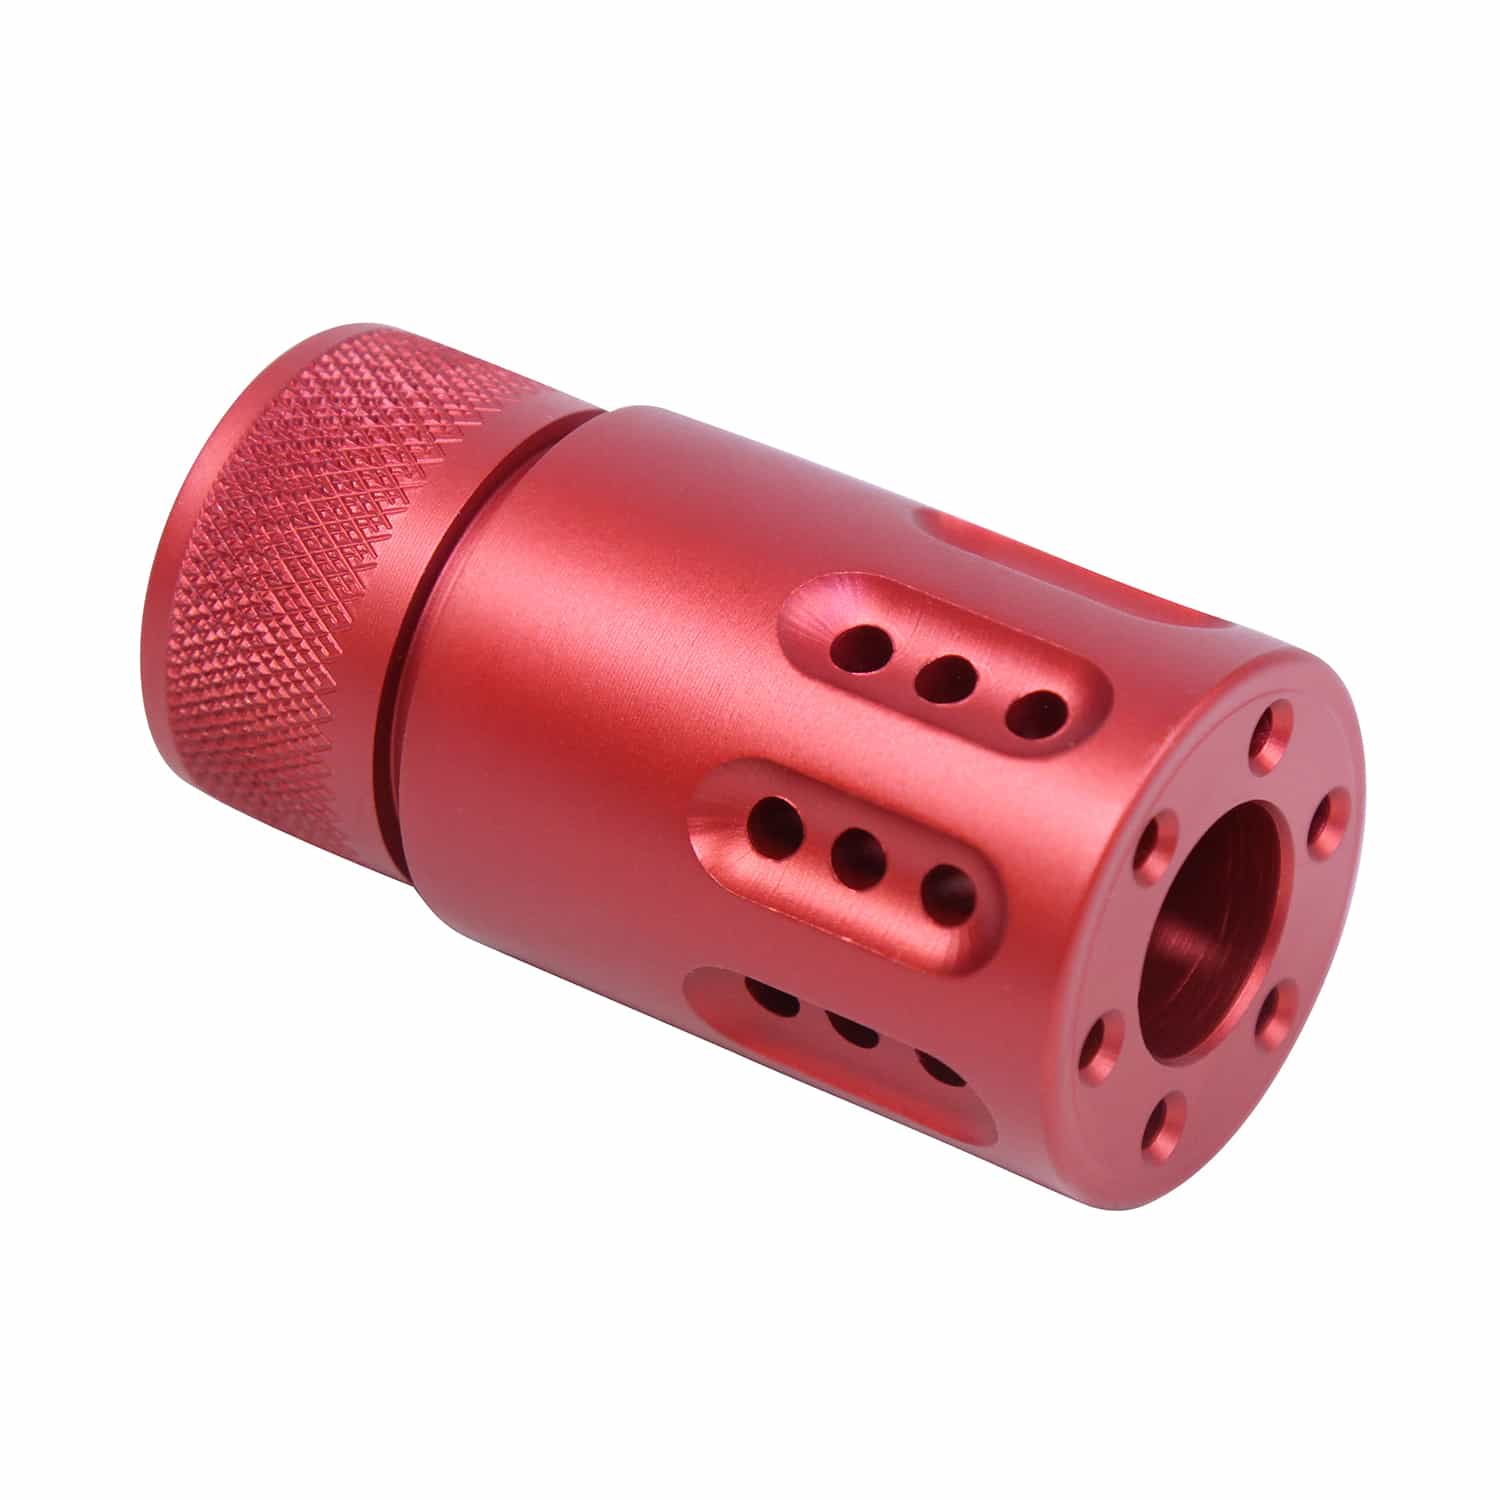 An AR-15 9MM red anodized muzzle brake and barrel shroud.